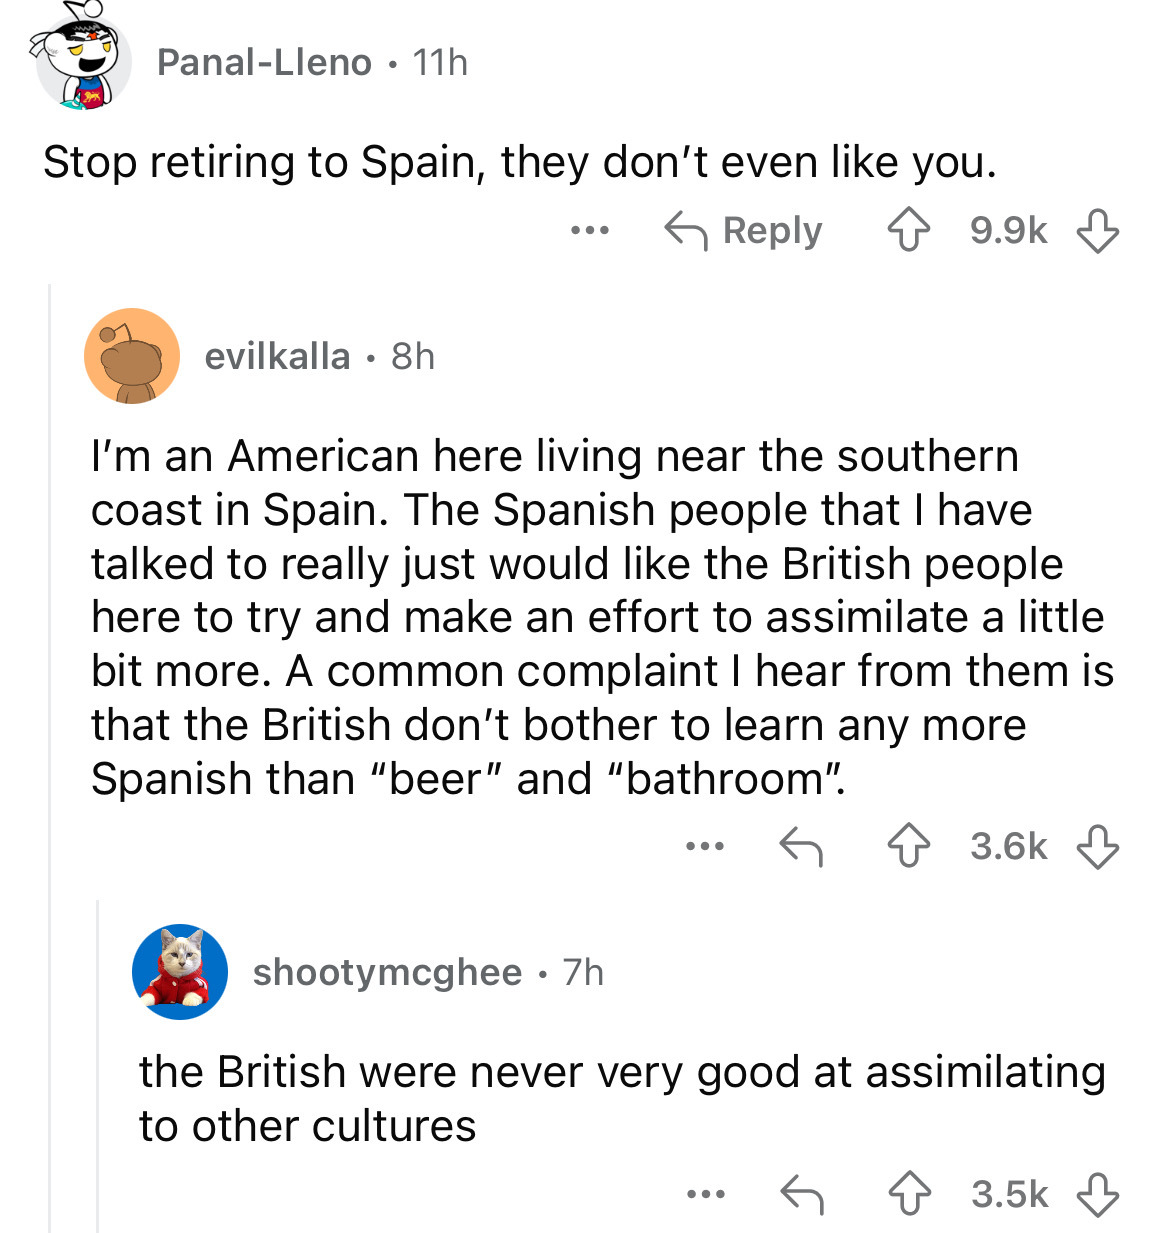 screenshot - PanalLleno 11h Stop retiring to Spain, they don't even you. evilkalla 8h ... I'm an American here living near the southern coast in Spain. The Spanish people that I have talked to really just would the British people here to try and make an e